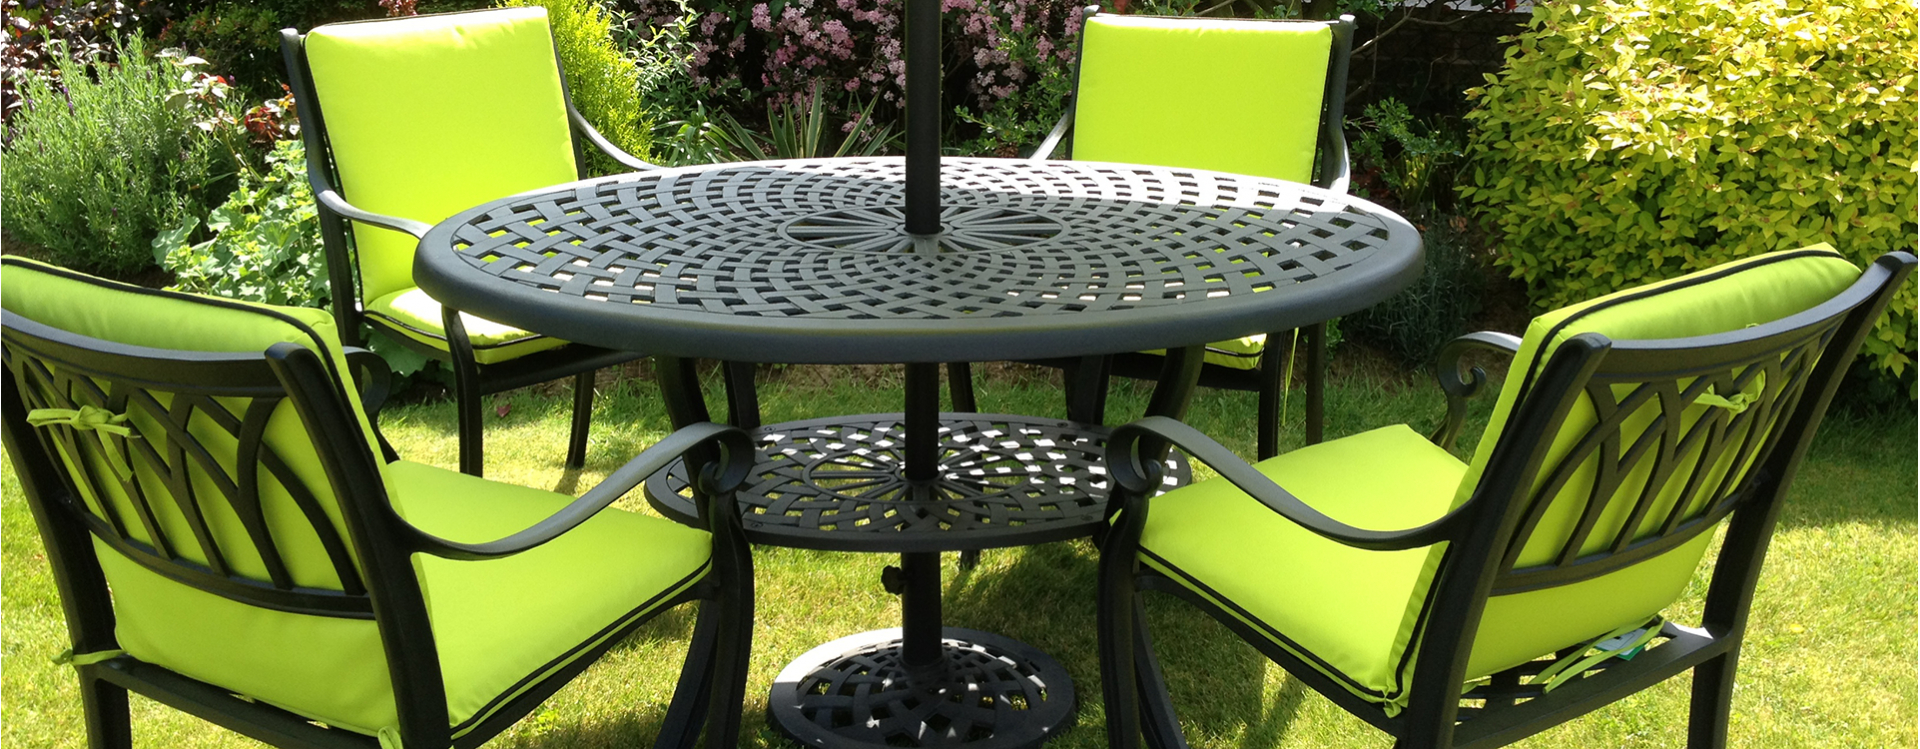 Cast Aluminium Garden Furniture Free Fast Delivery pertaining to proportions 1920 X 749